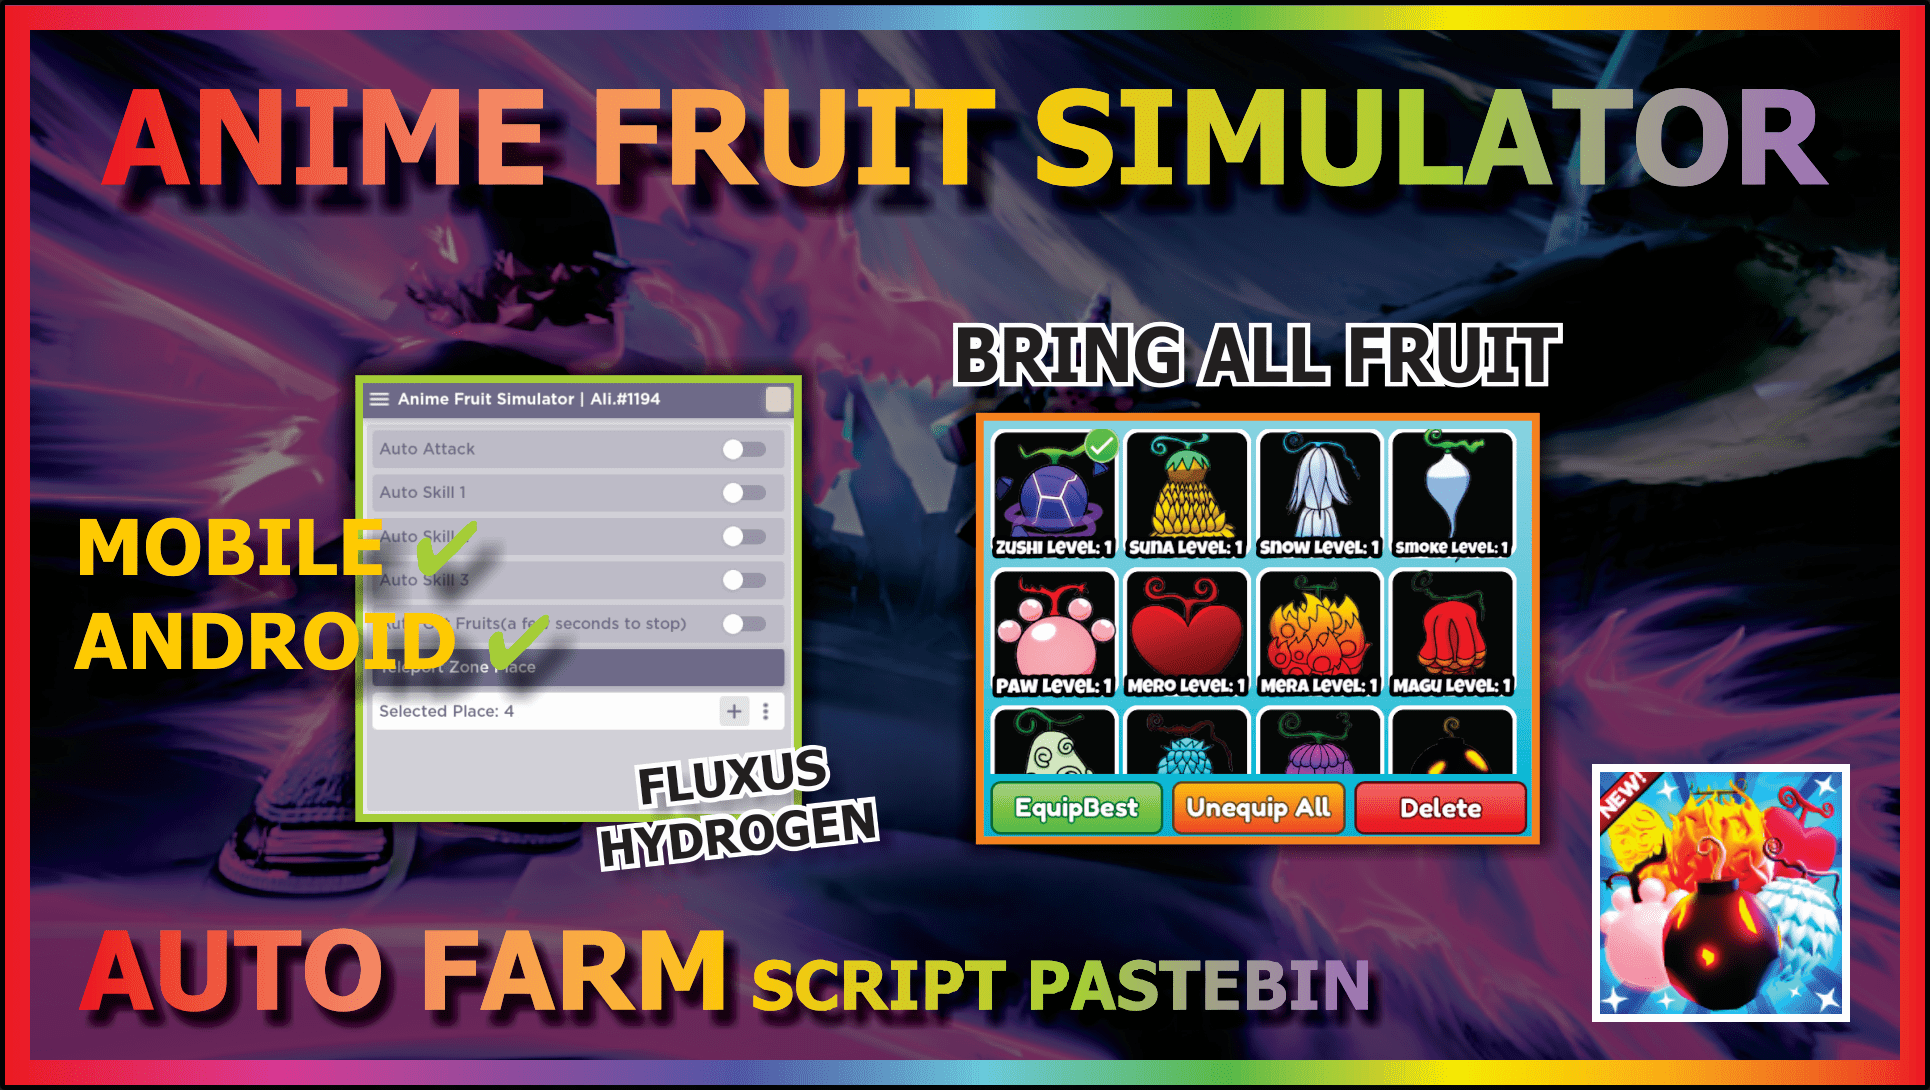 You are currently viewing ANIME FRUIT SIMULATOR (ALI)